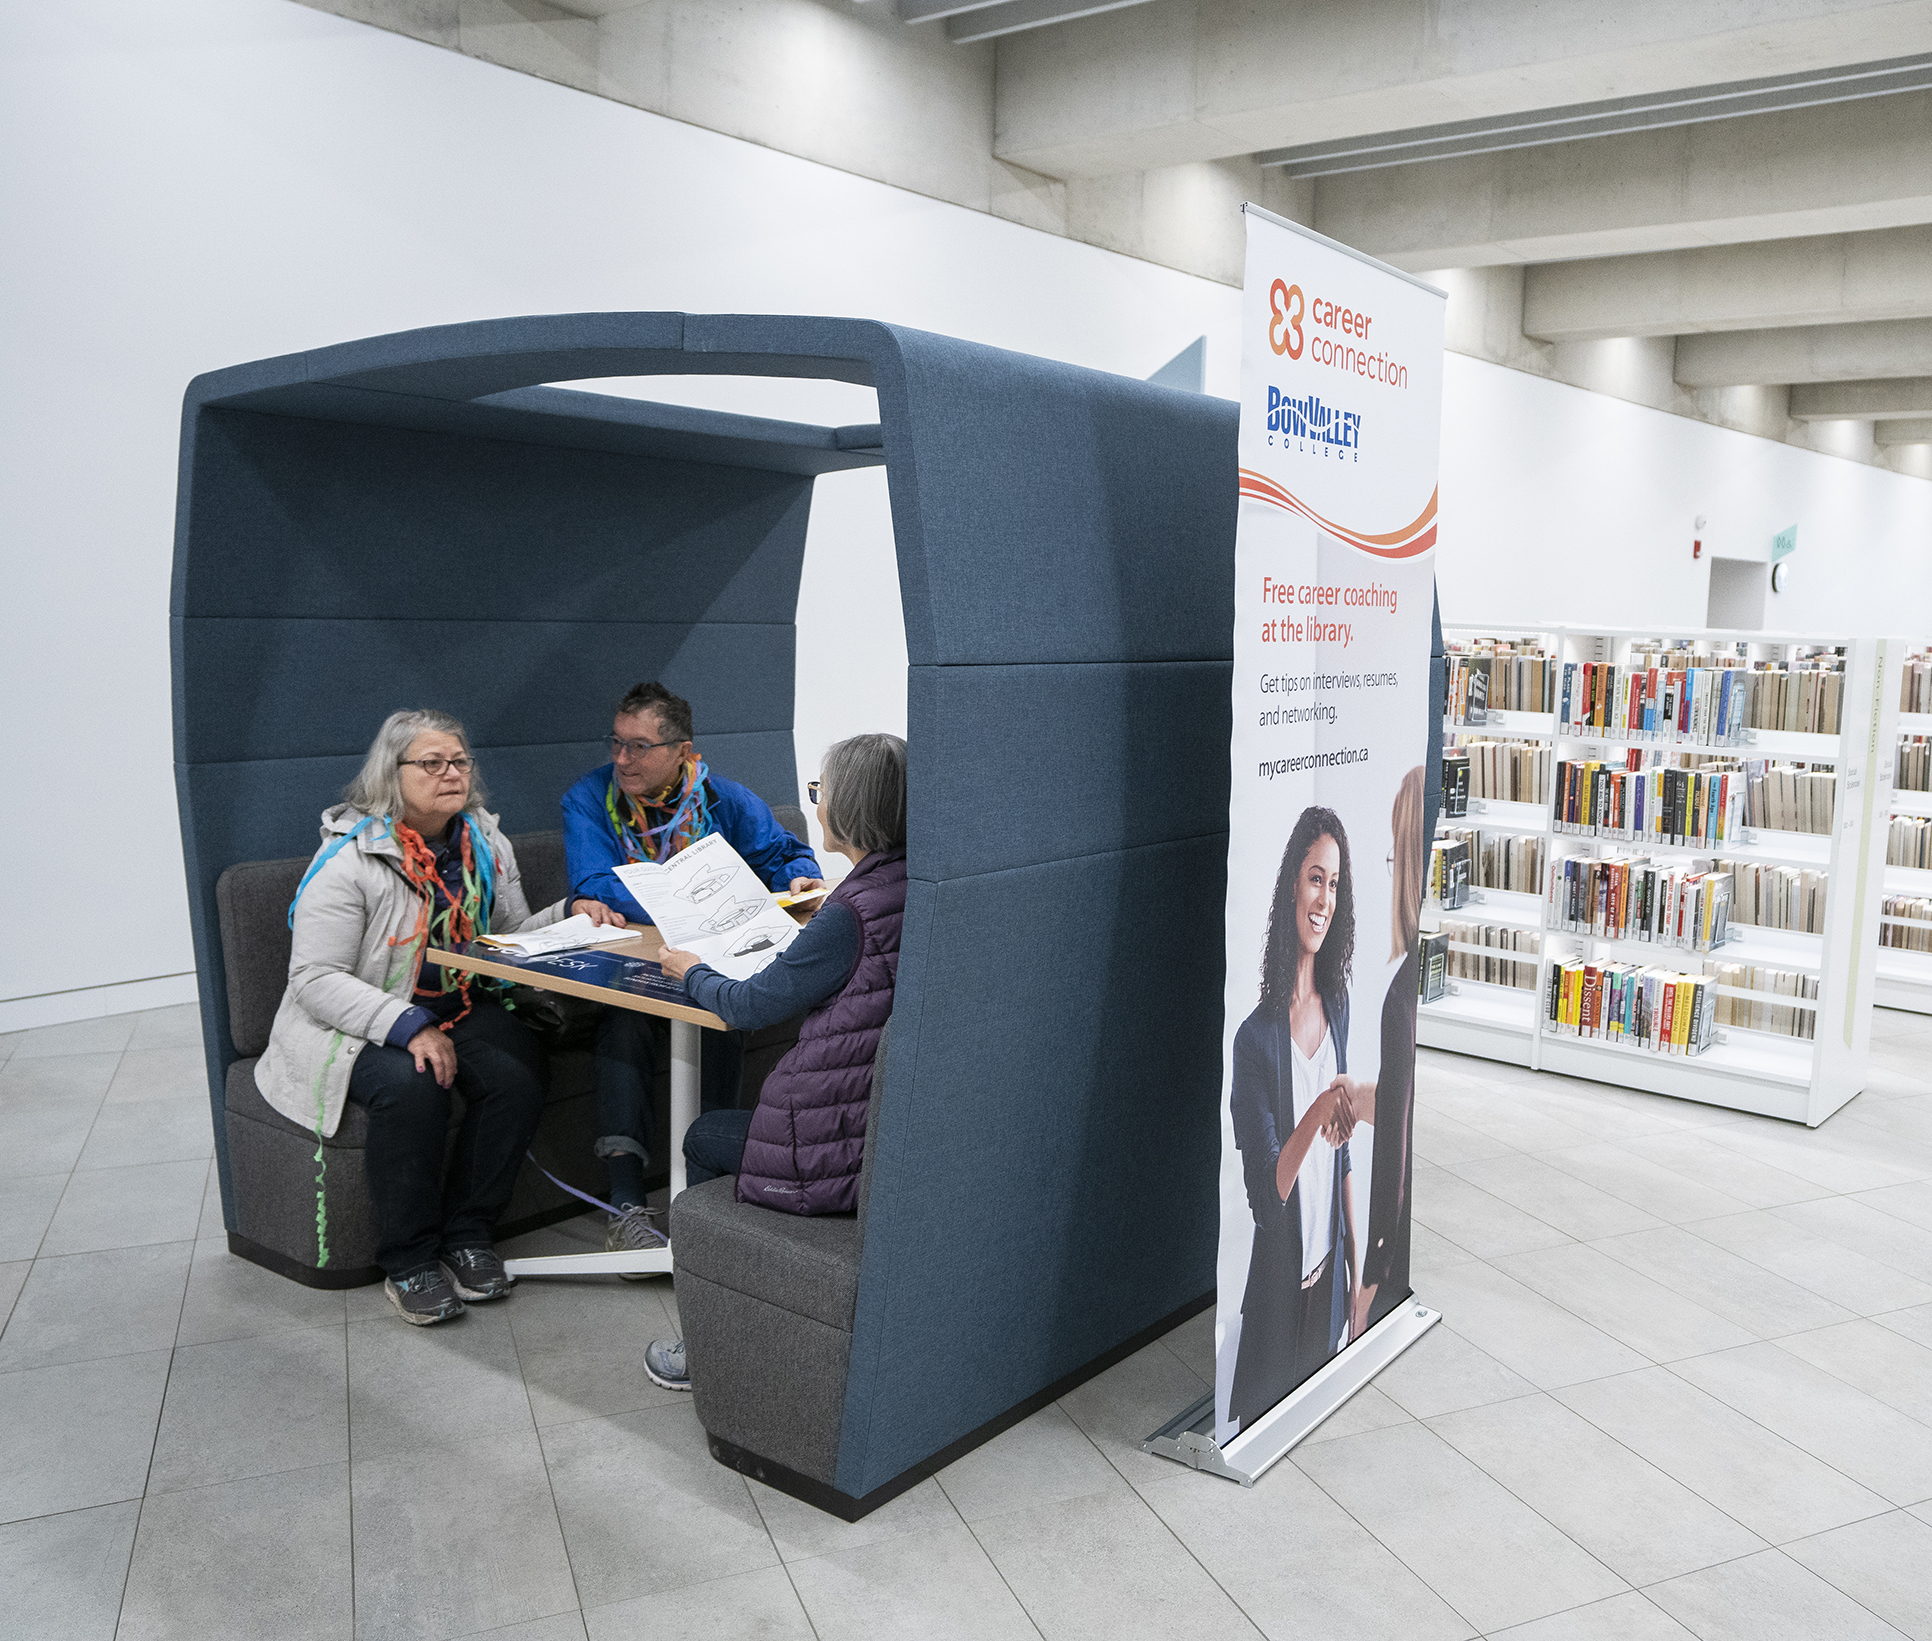 Job Desk opens in the new Central Library